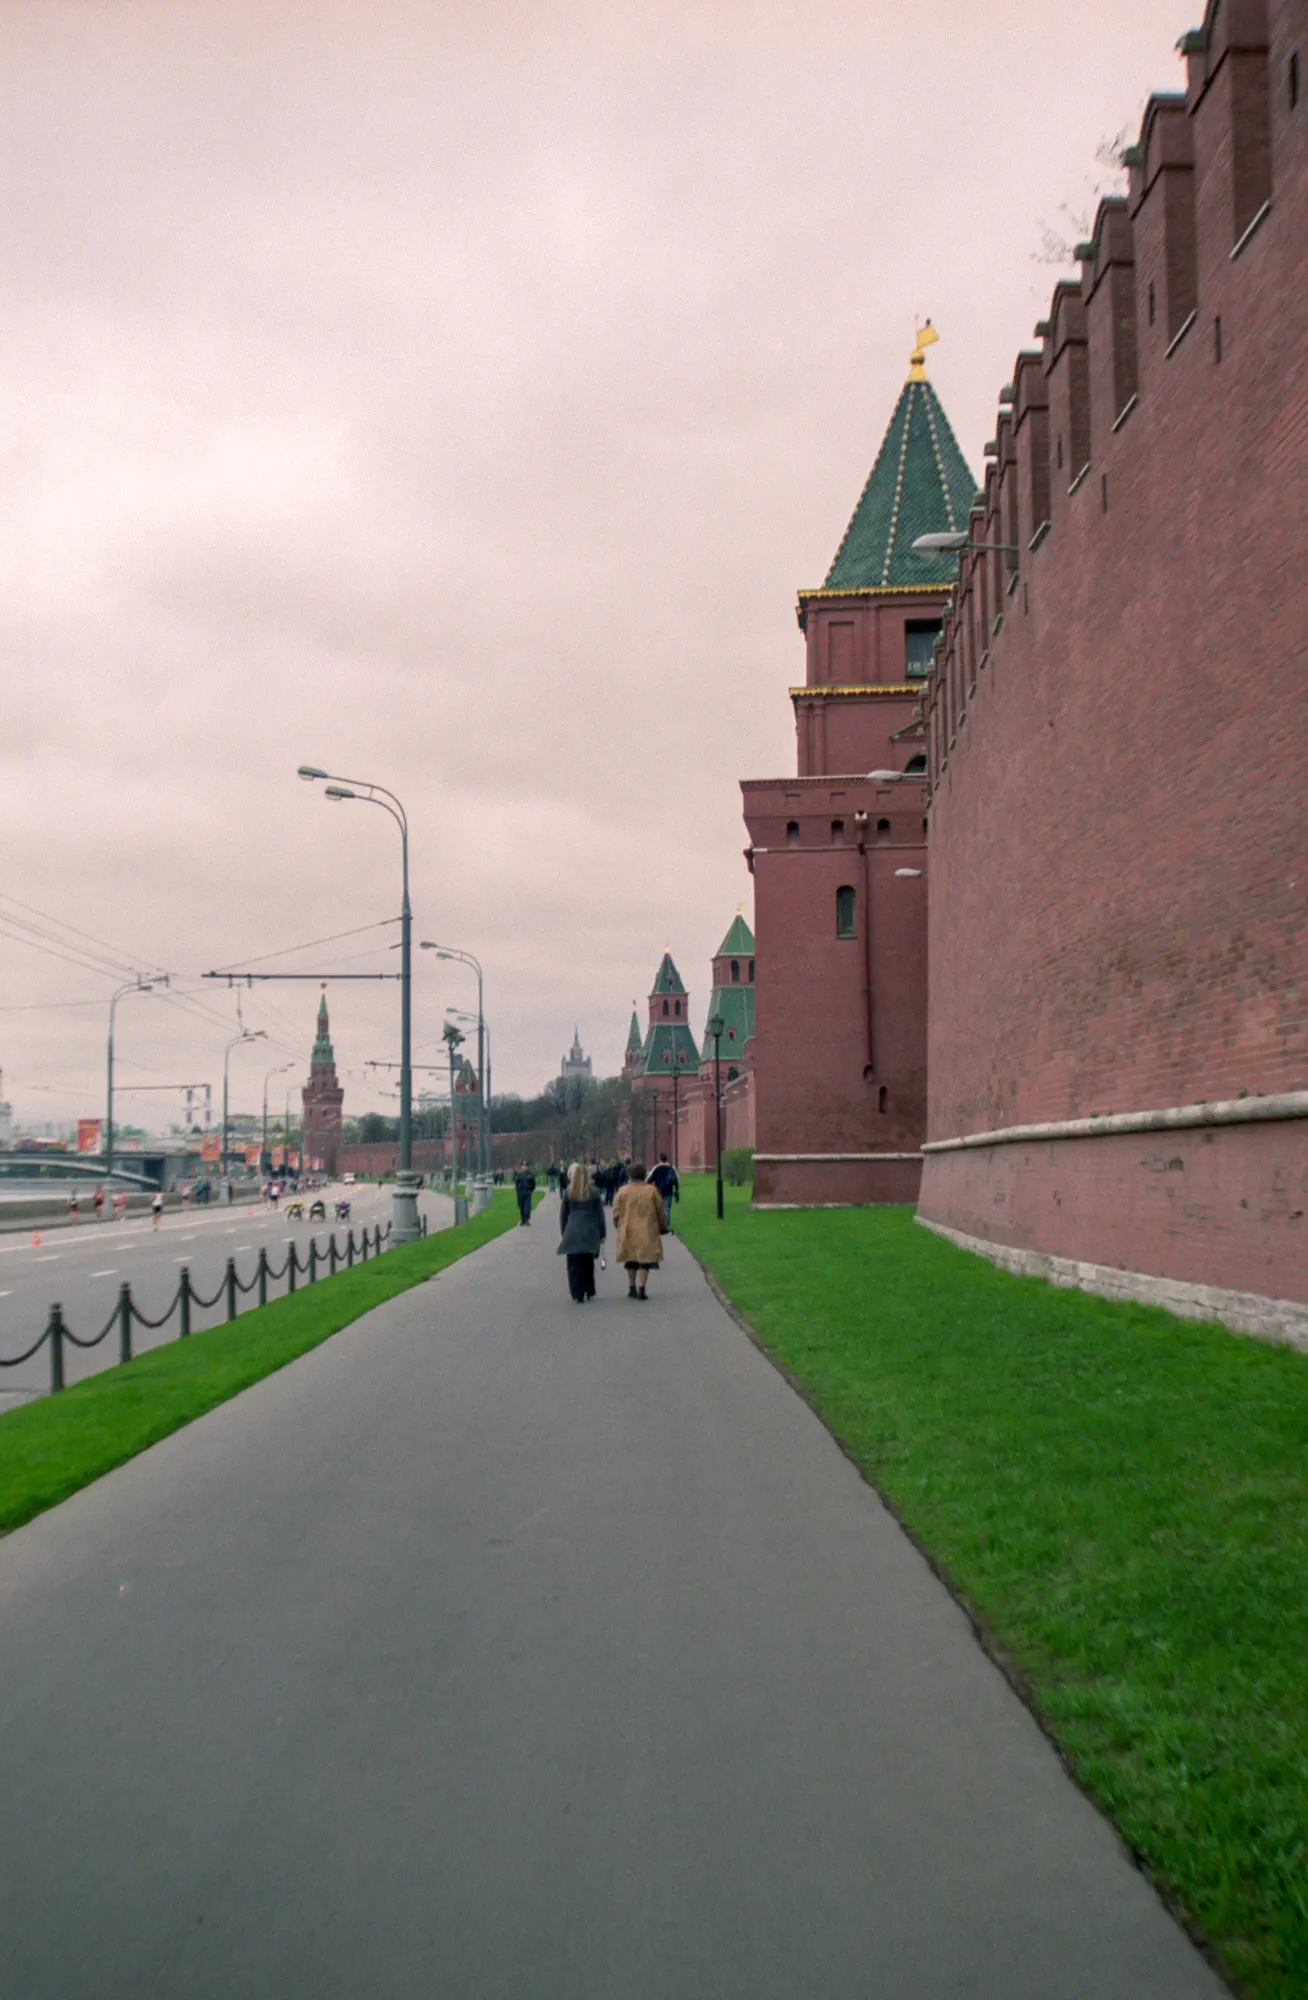 Between the Kremlin and the River